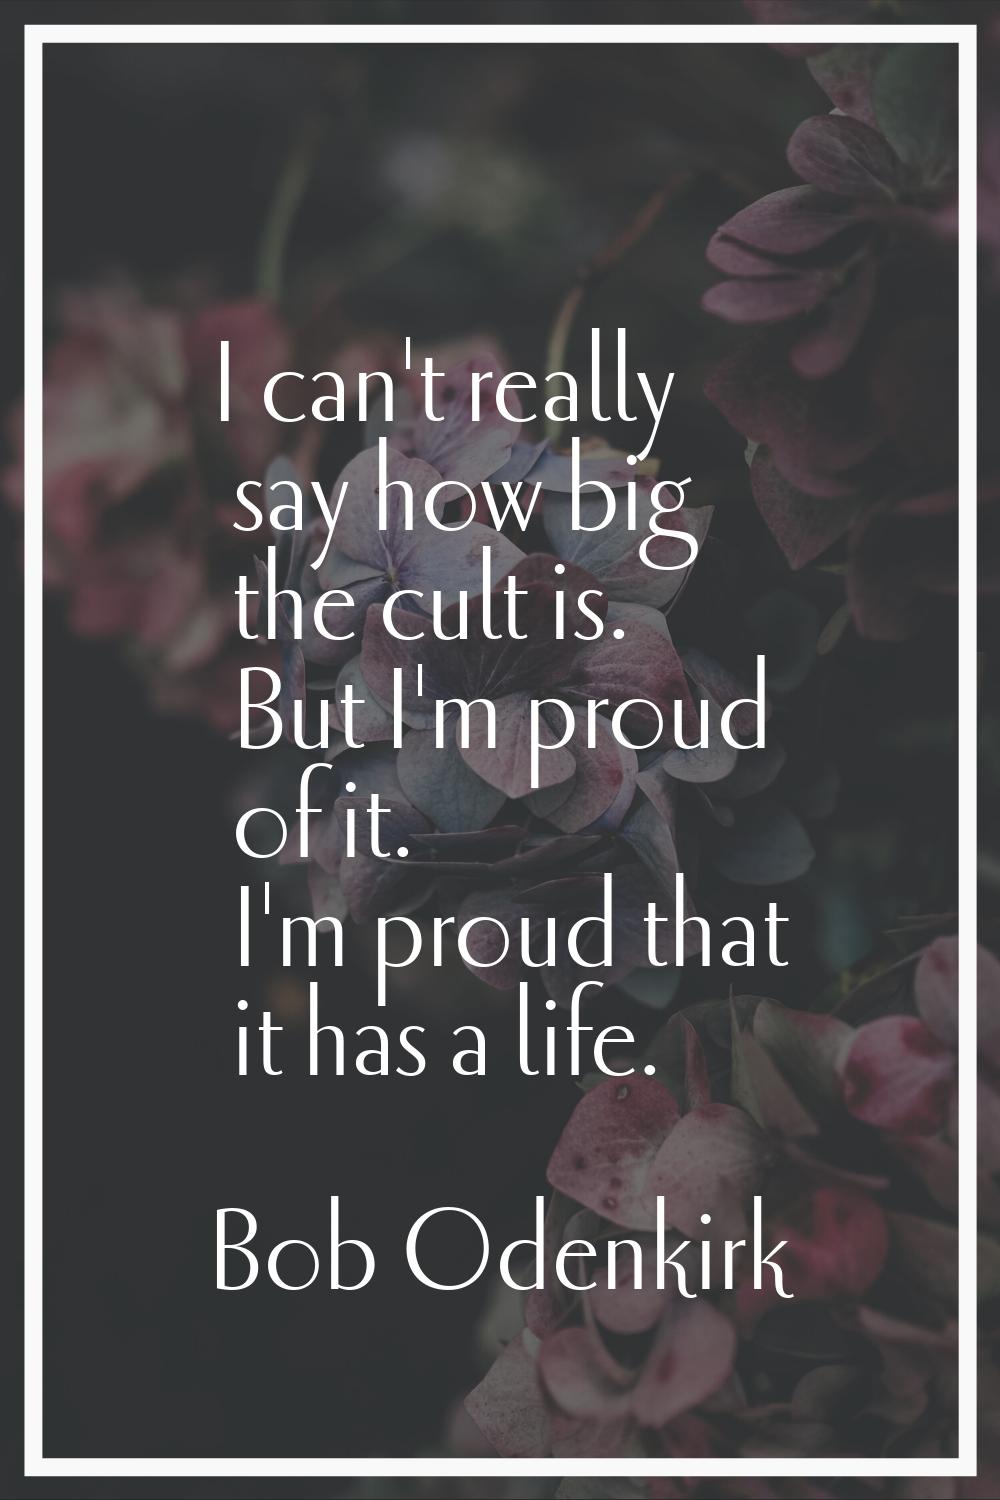 I can't really say how big the cult is. But I'm proud of it. I'm proud that it has a life.